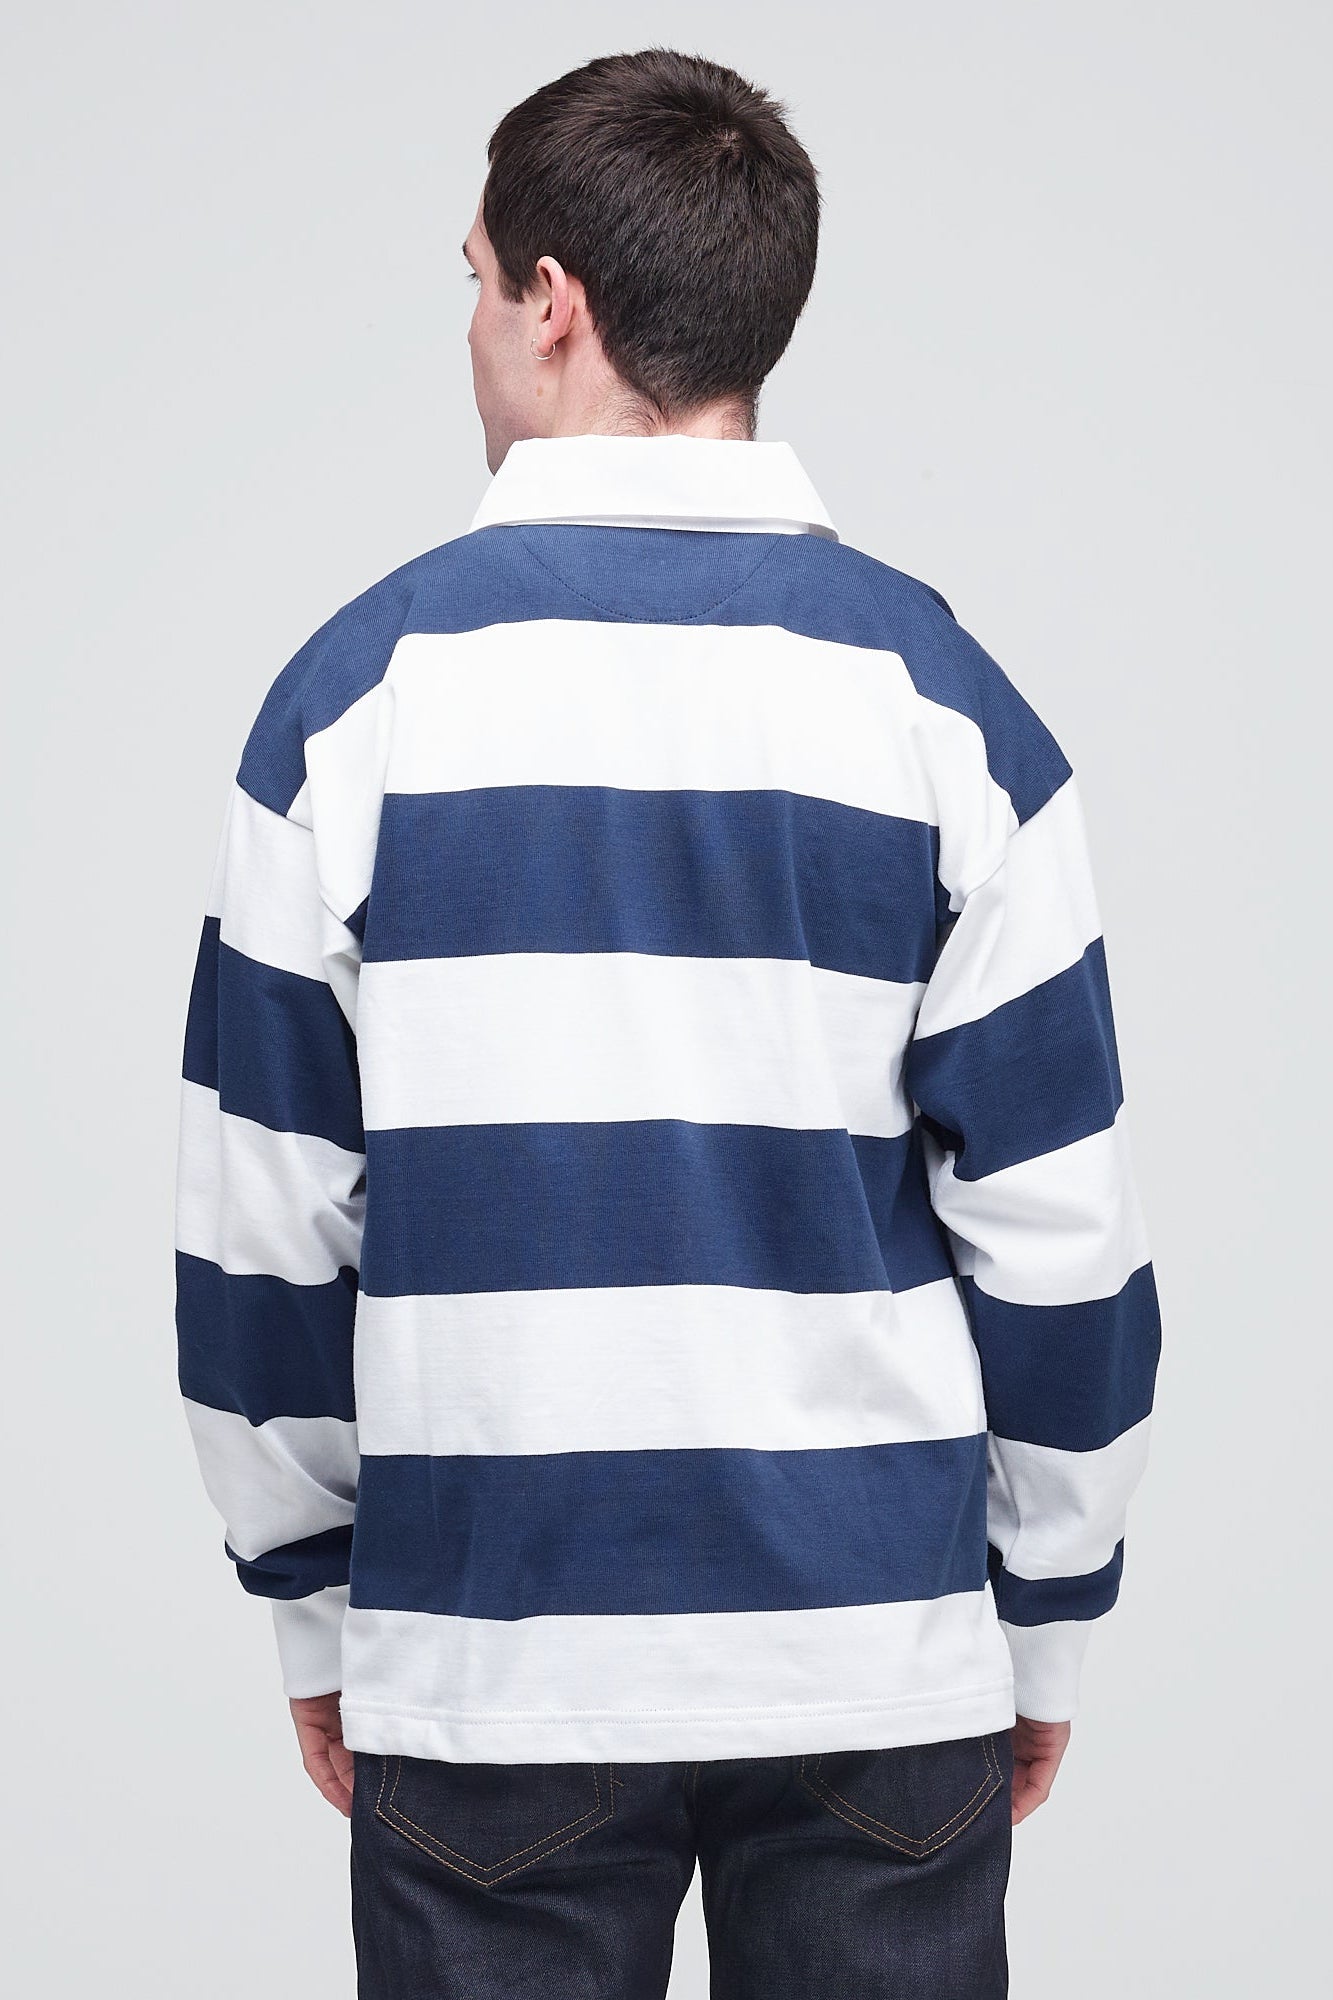 Male_Wide-Striped-Rugby-Shirt_Navey-White_Back